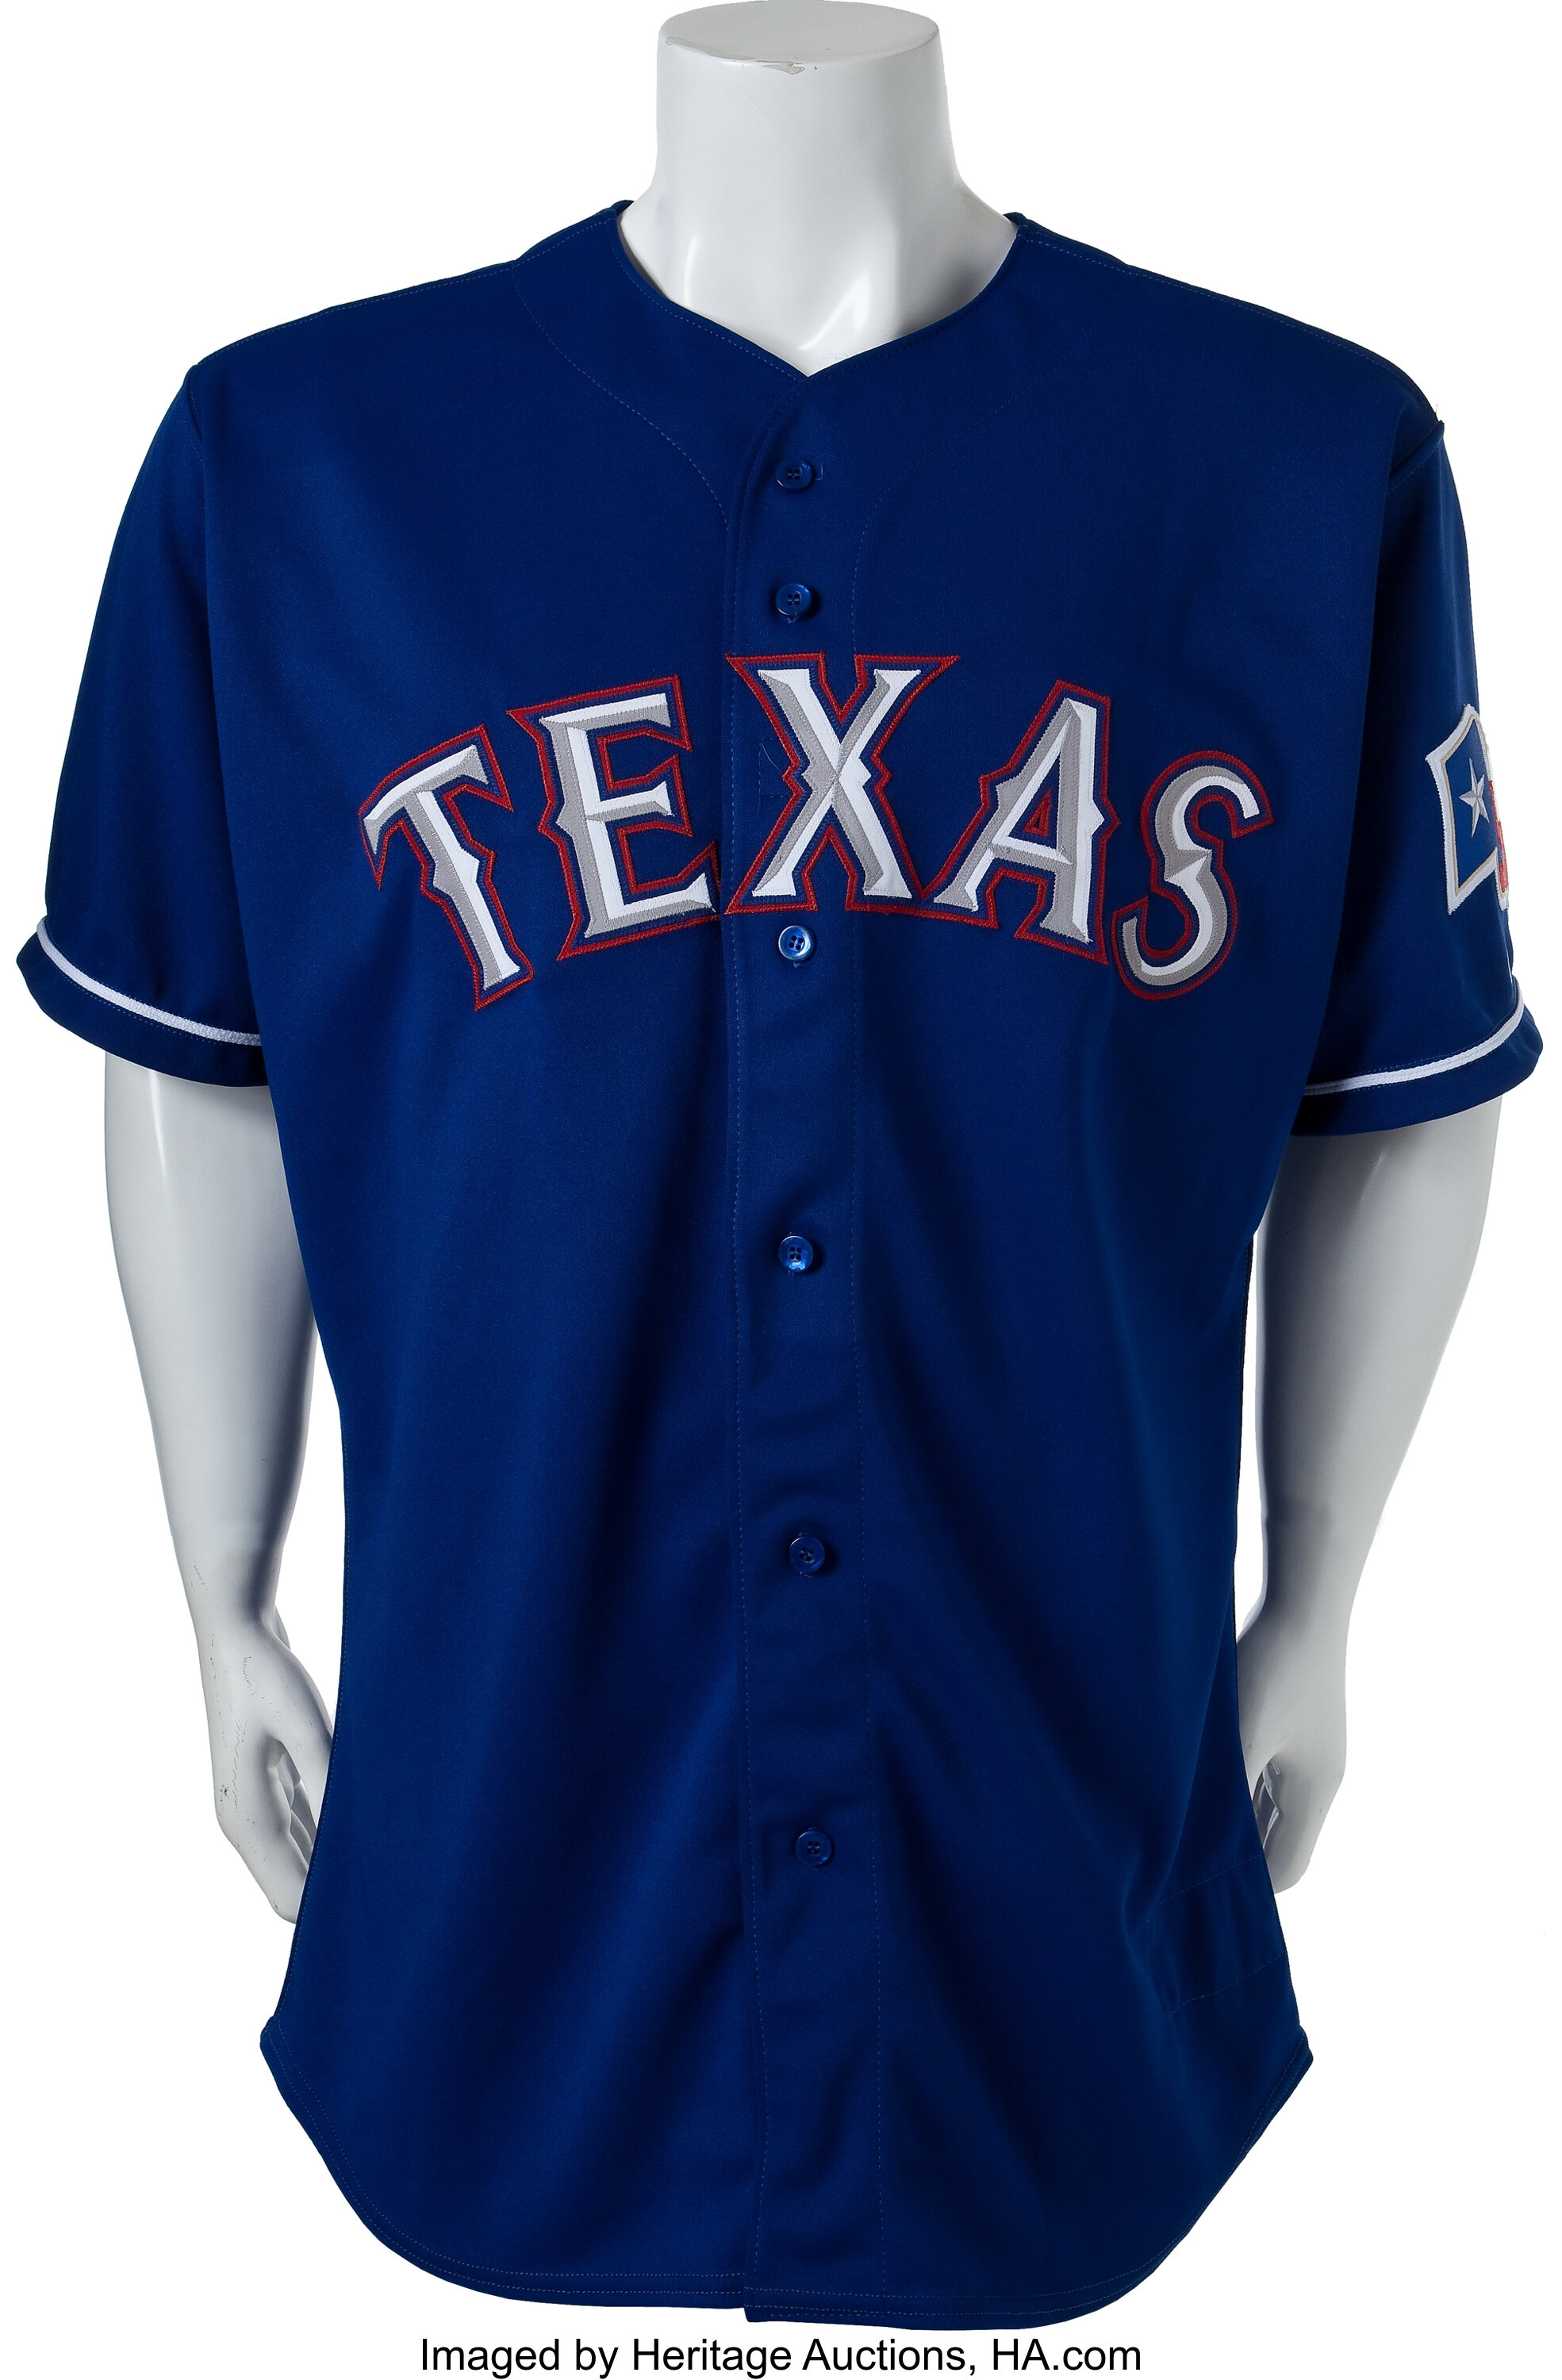 Freshest jerseys in the game. Big ups to the @Texas Rangers for